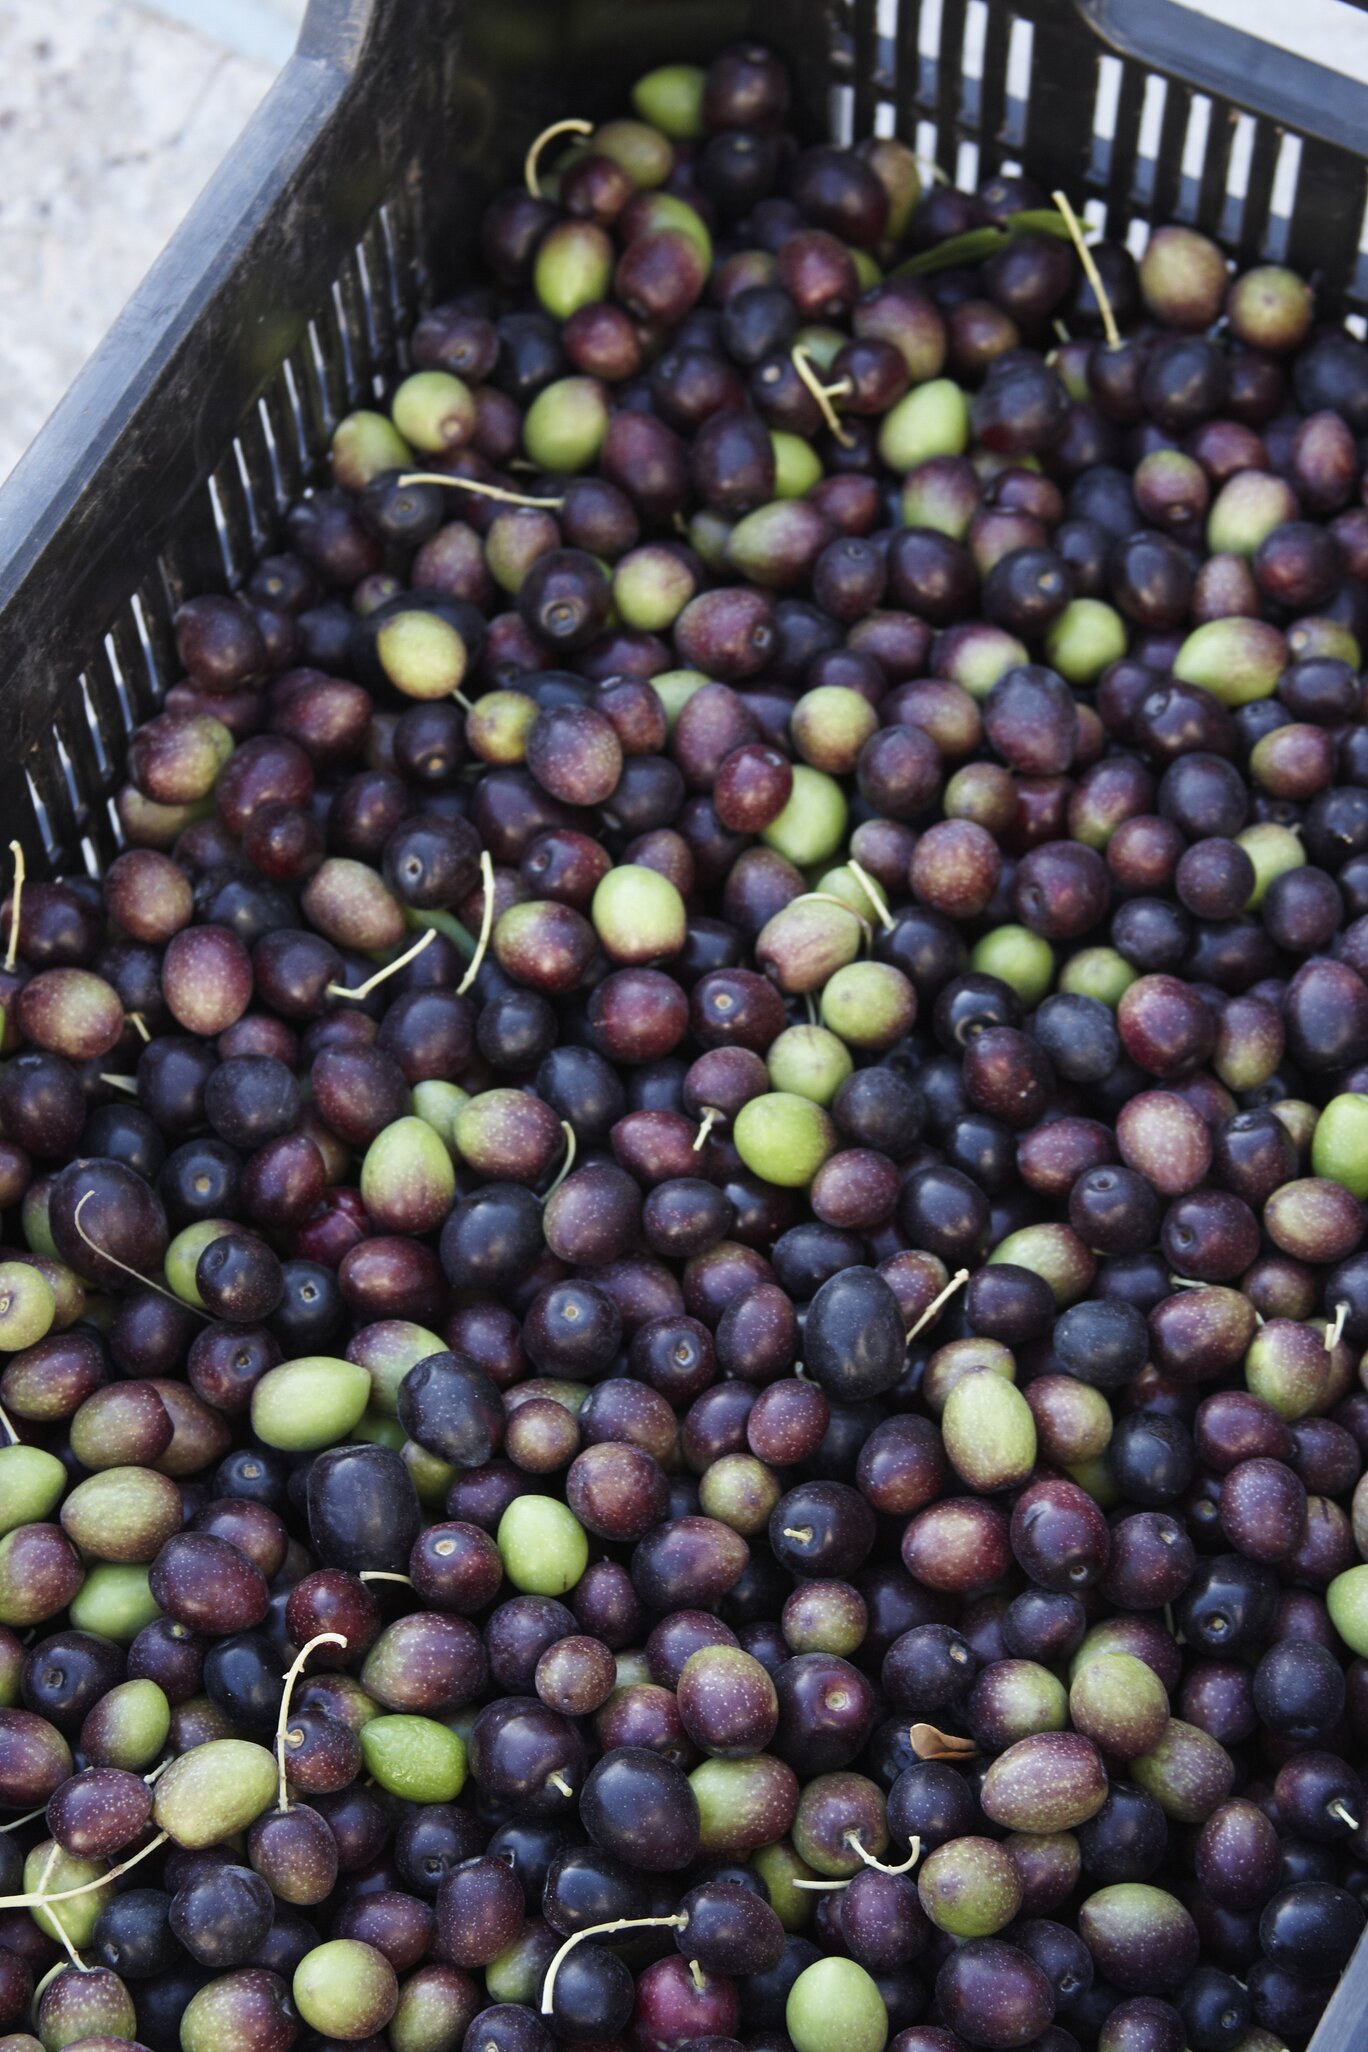 We carefully hand-pick a mix of green and black olives for a delicate leafy and spicy flavour.